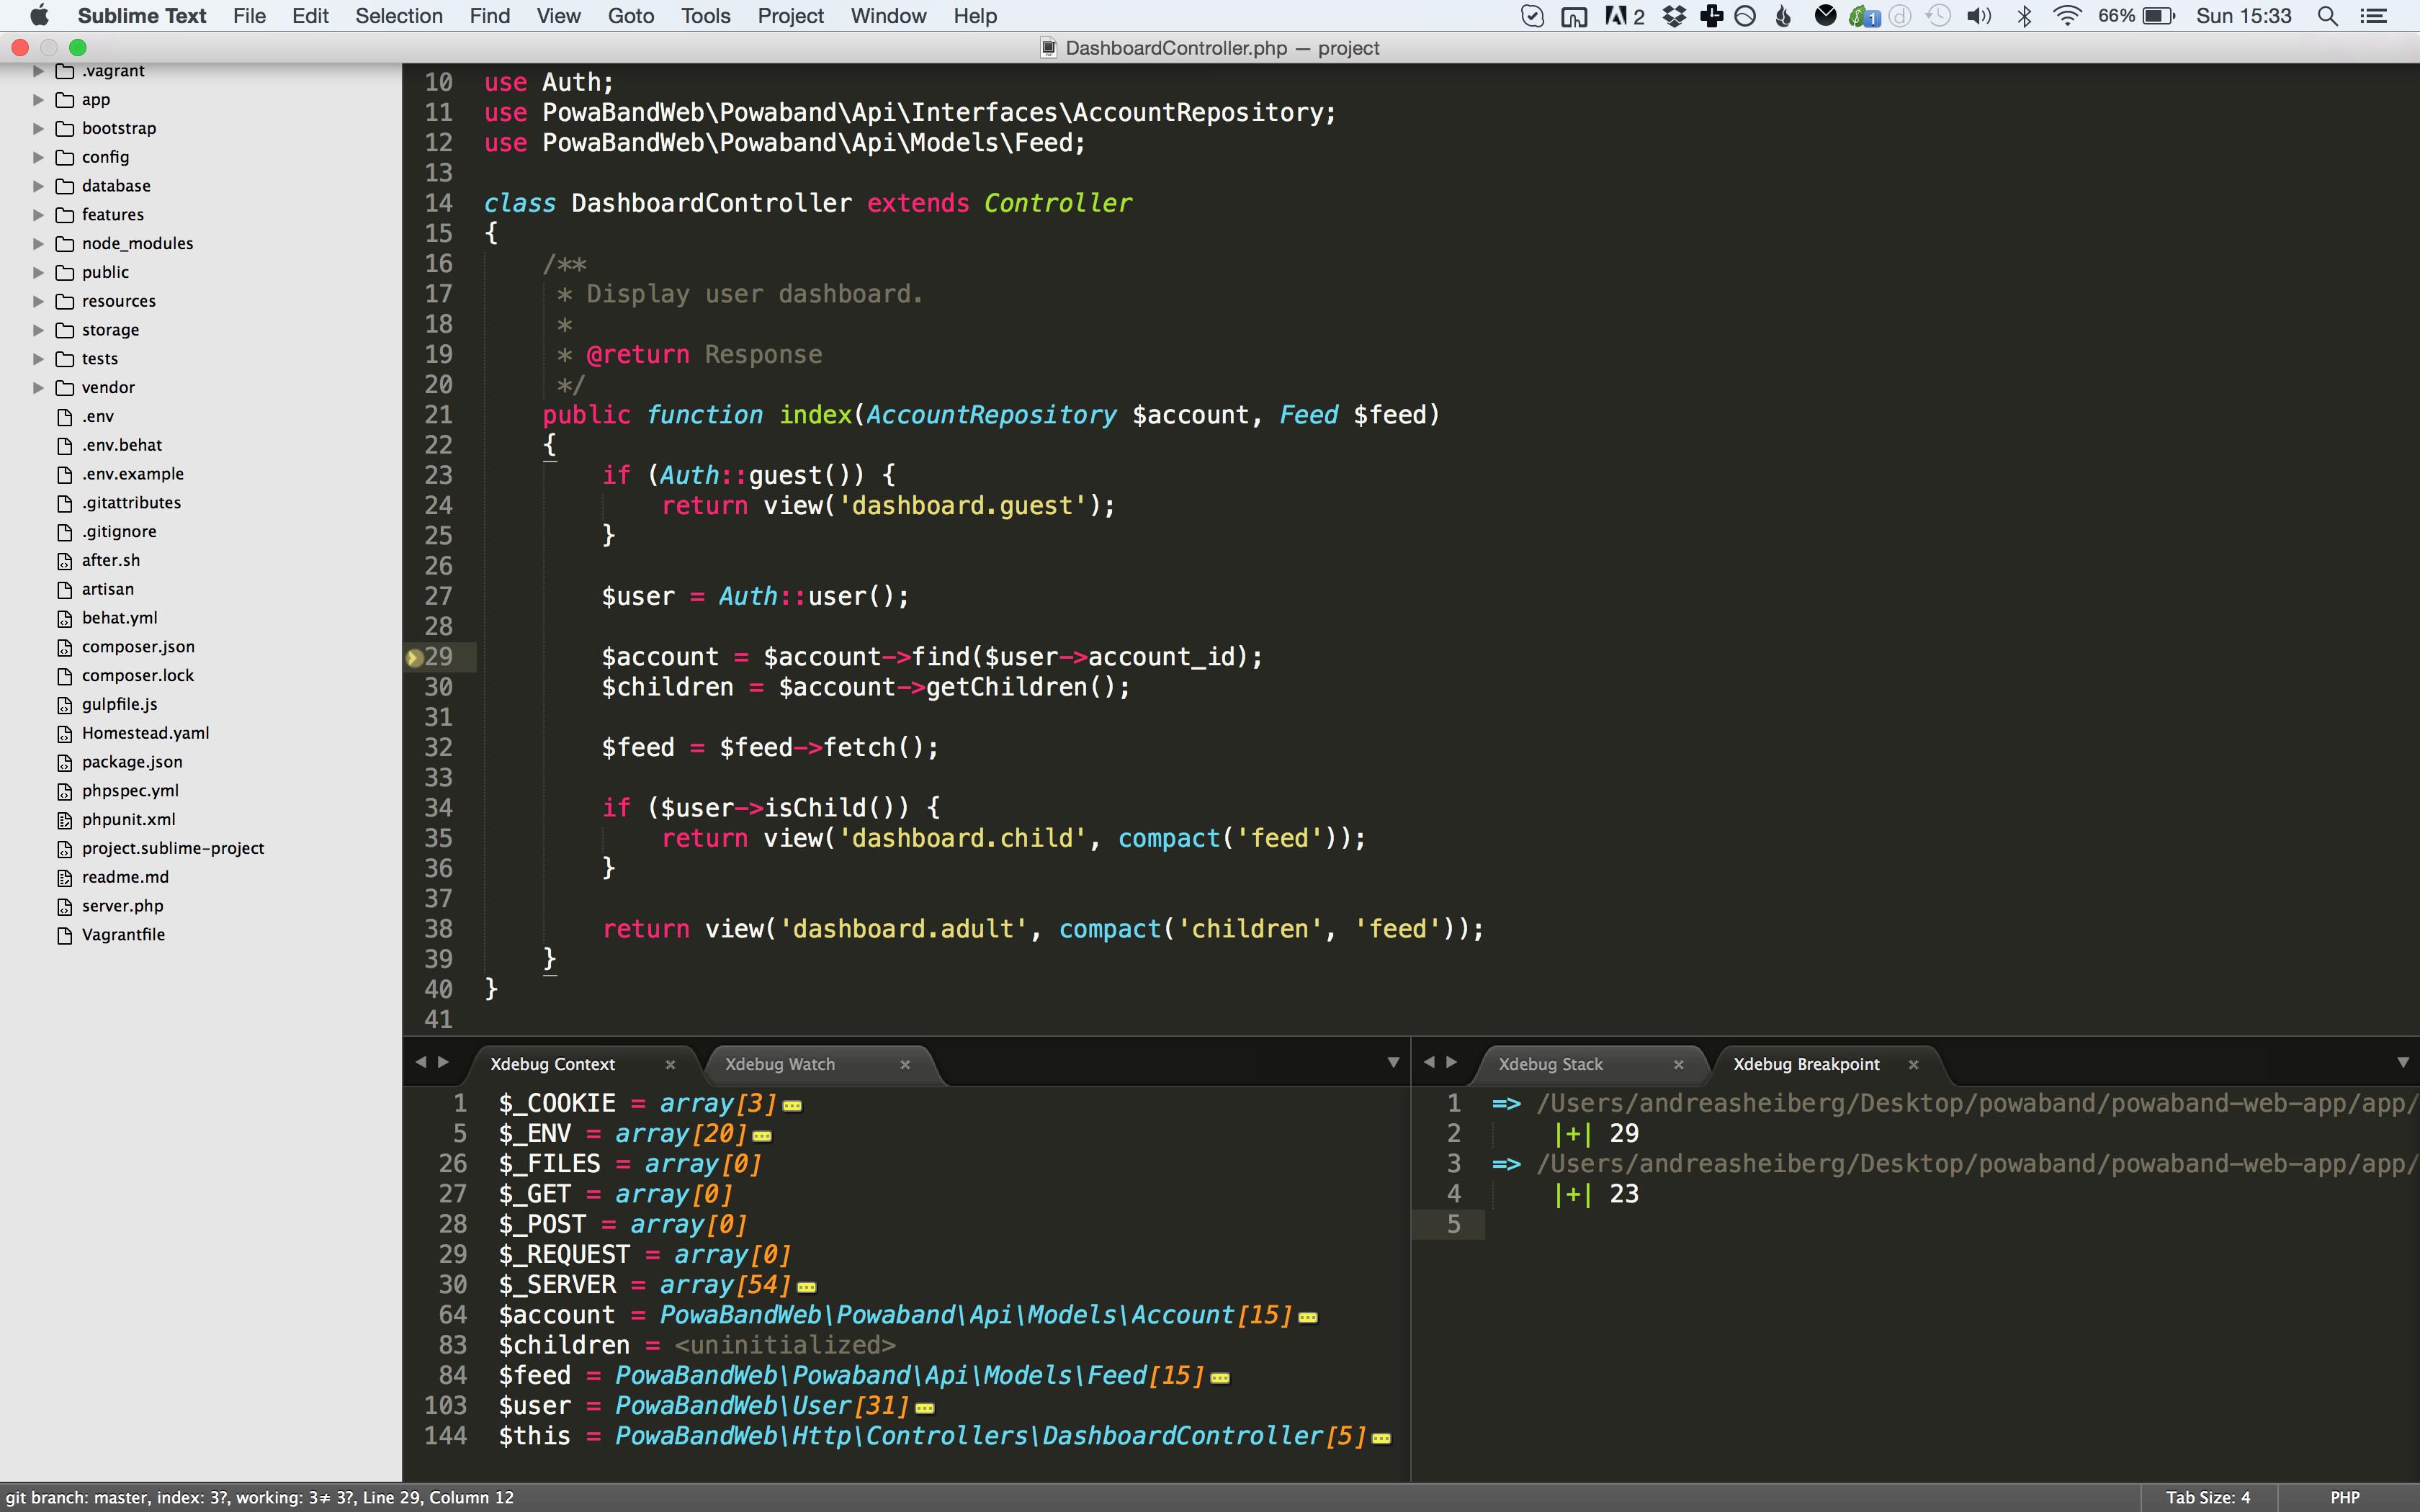 Sublime Text xDebug: Hitting a breakpoint